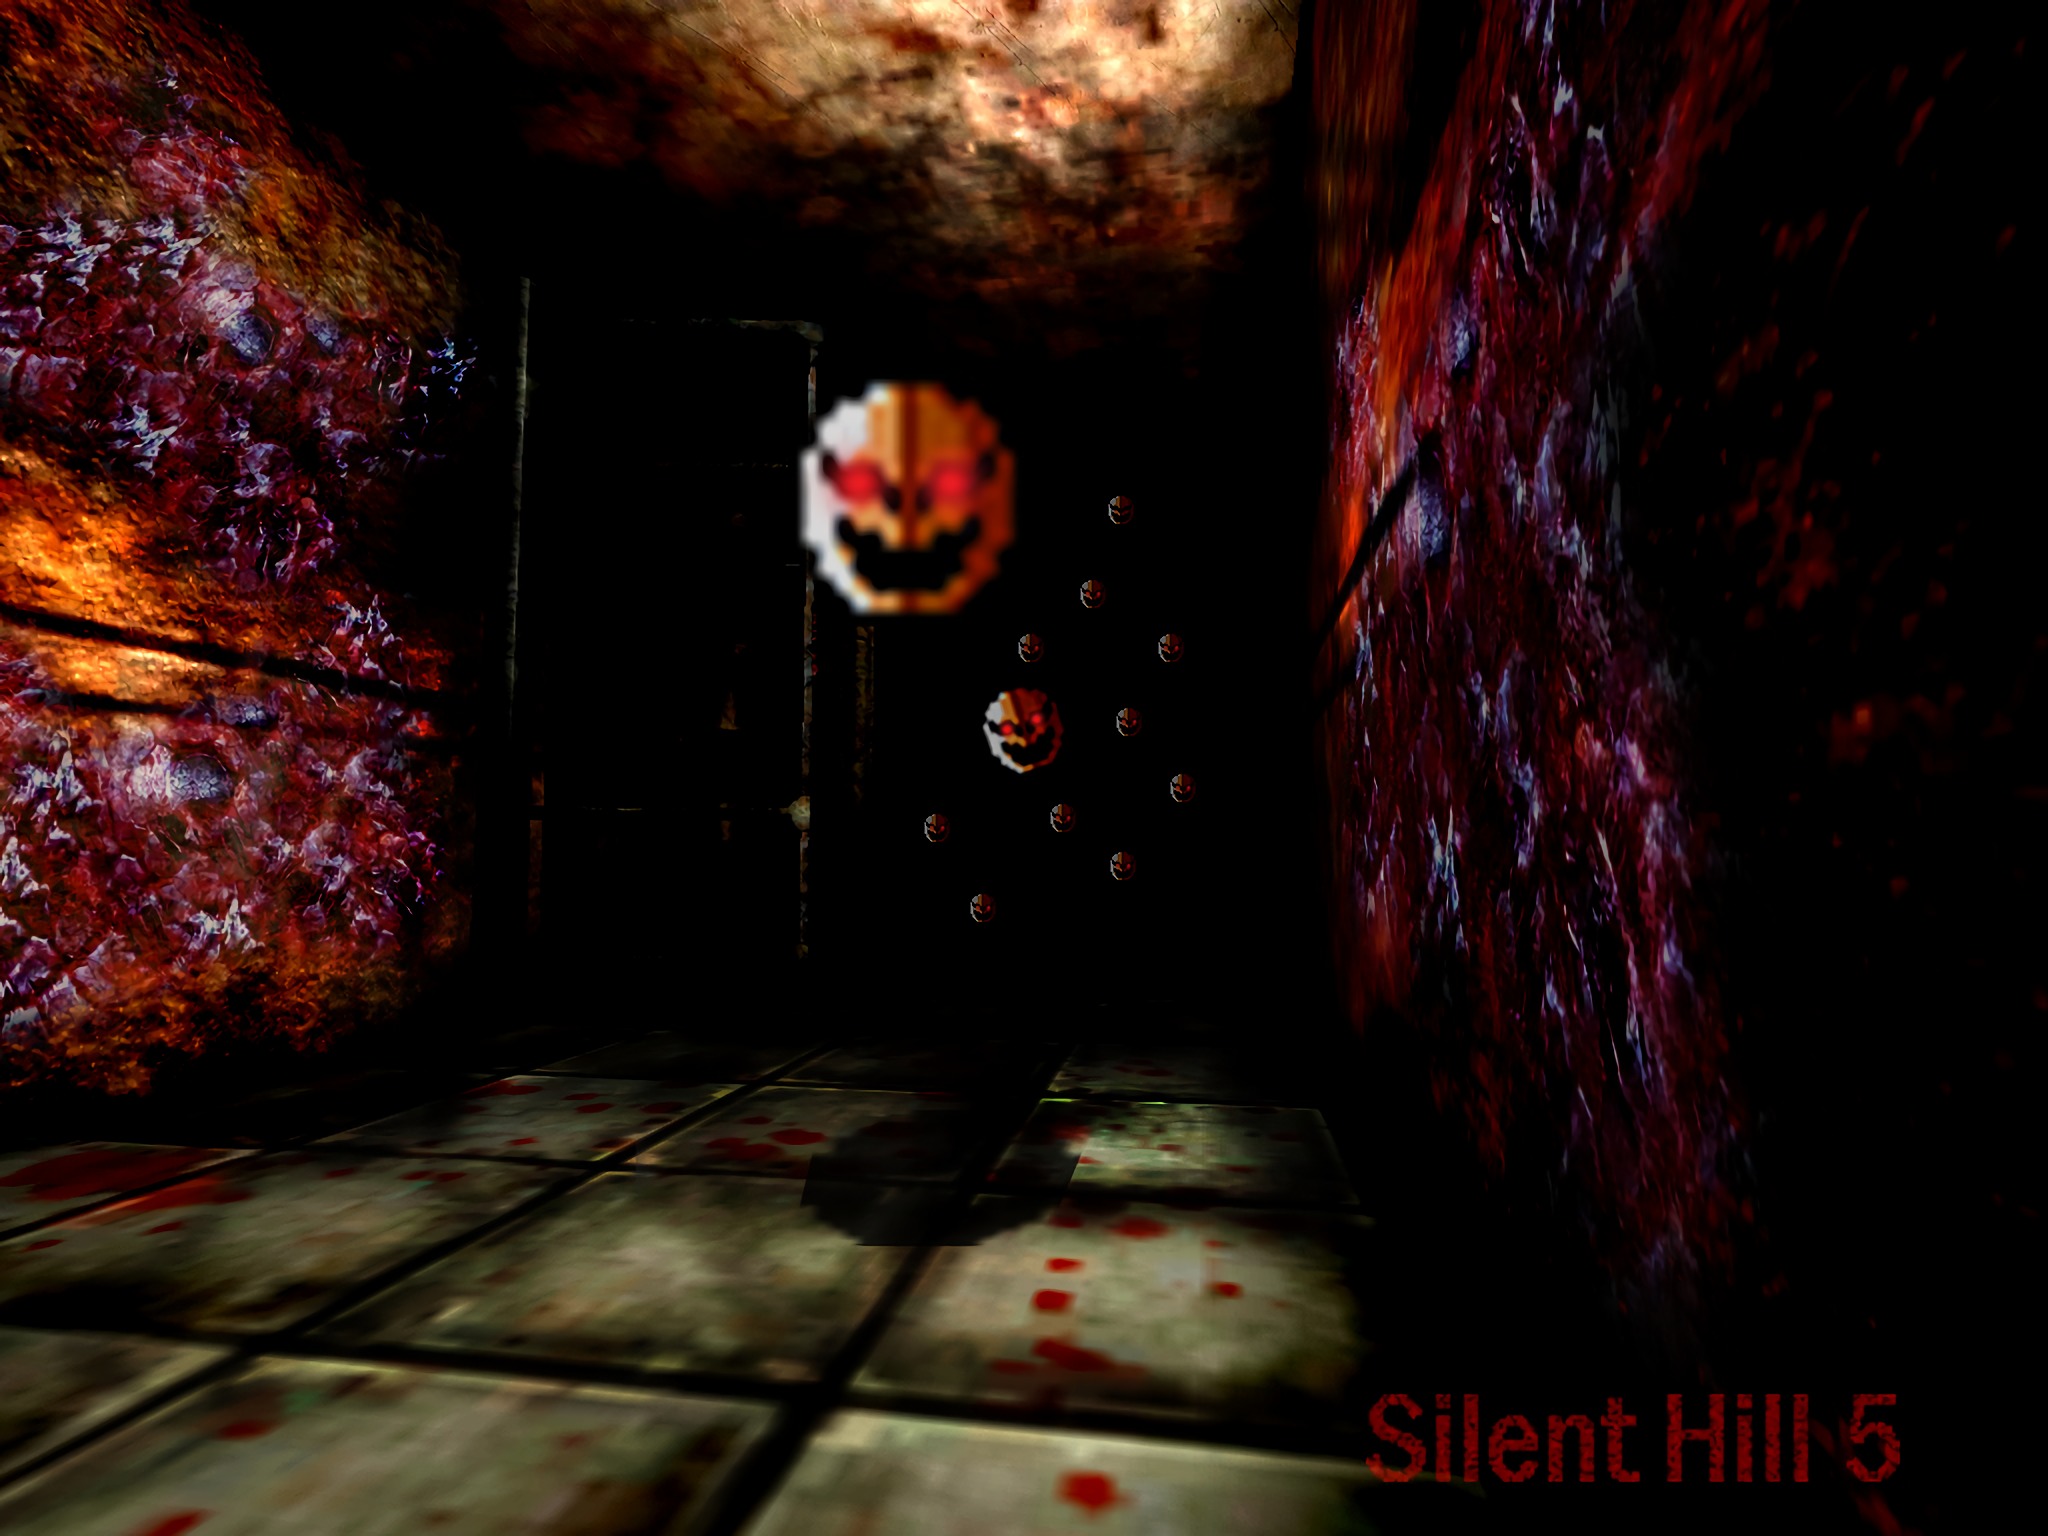 Silent Hill: Homecoming HD Wallpaper | Background Image ...